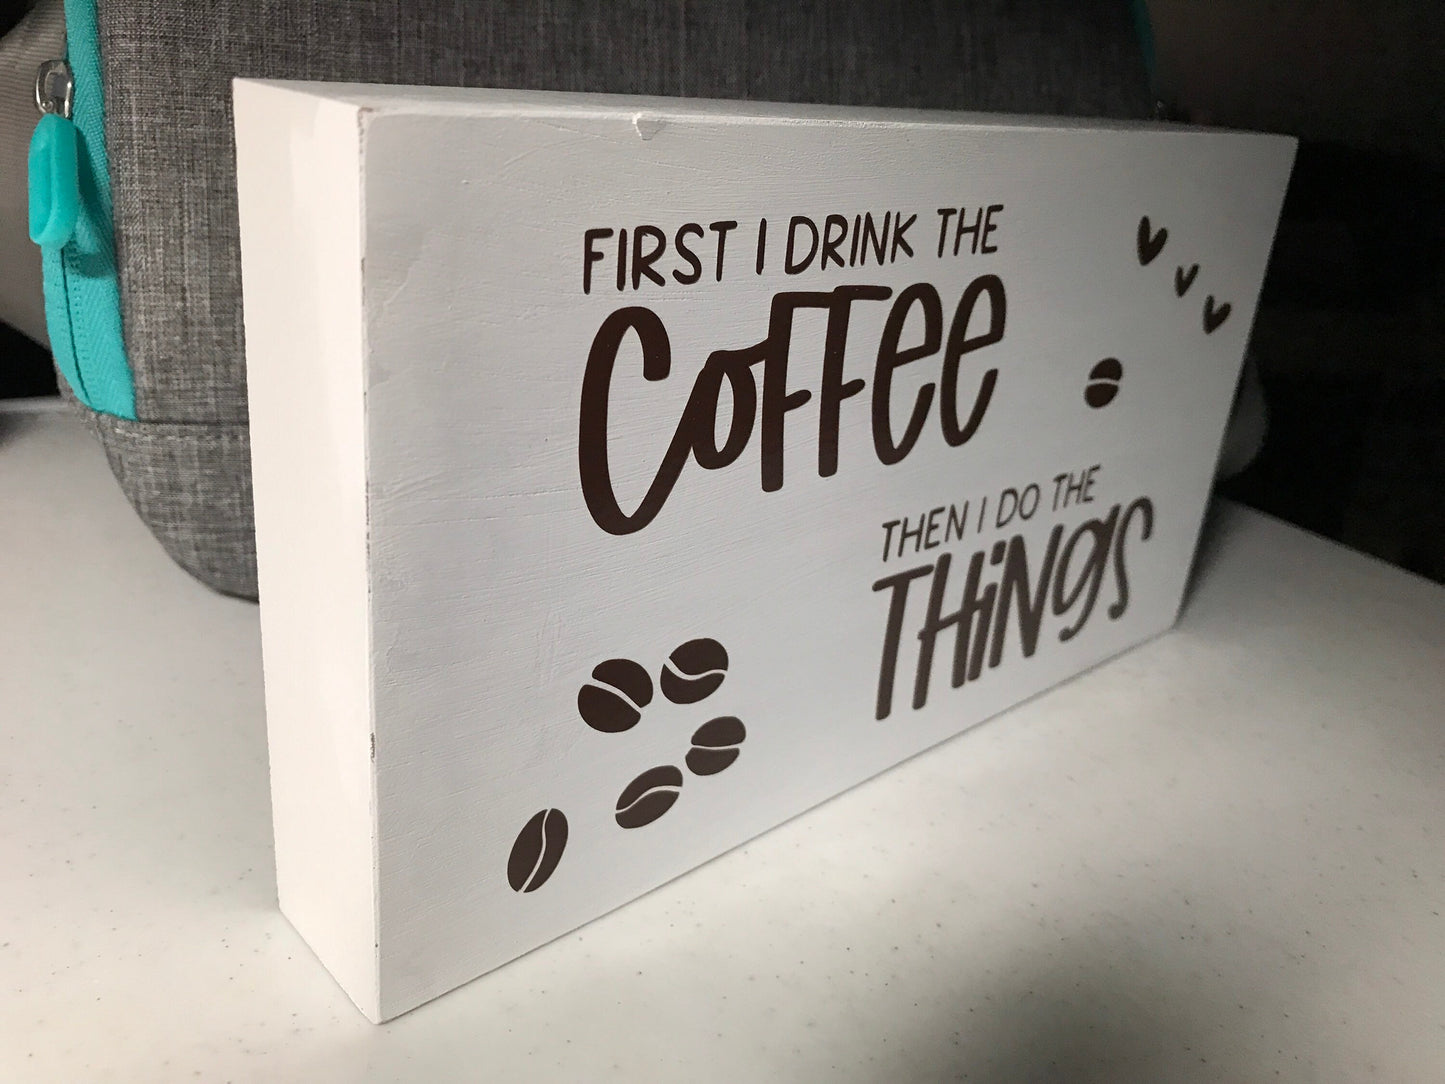 First I Drink the Coffee Wood Kitchen Decor Sign 9x5” Wood Block, Lettering in Chocolate Brown Permanent Vinyl, Farmhouse Cafe Decor